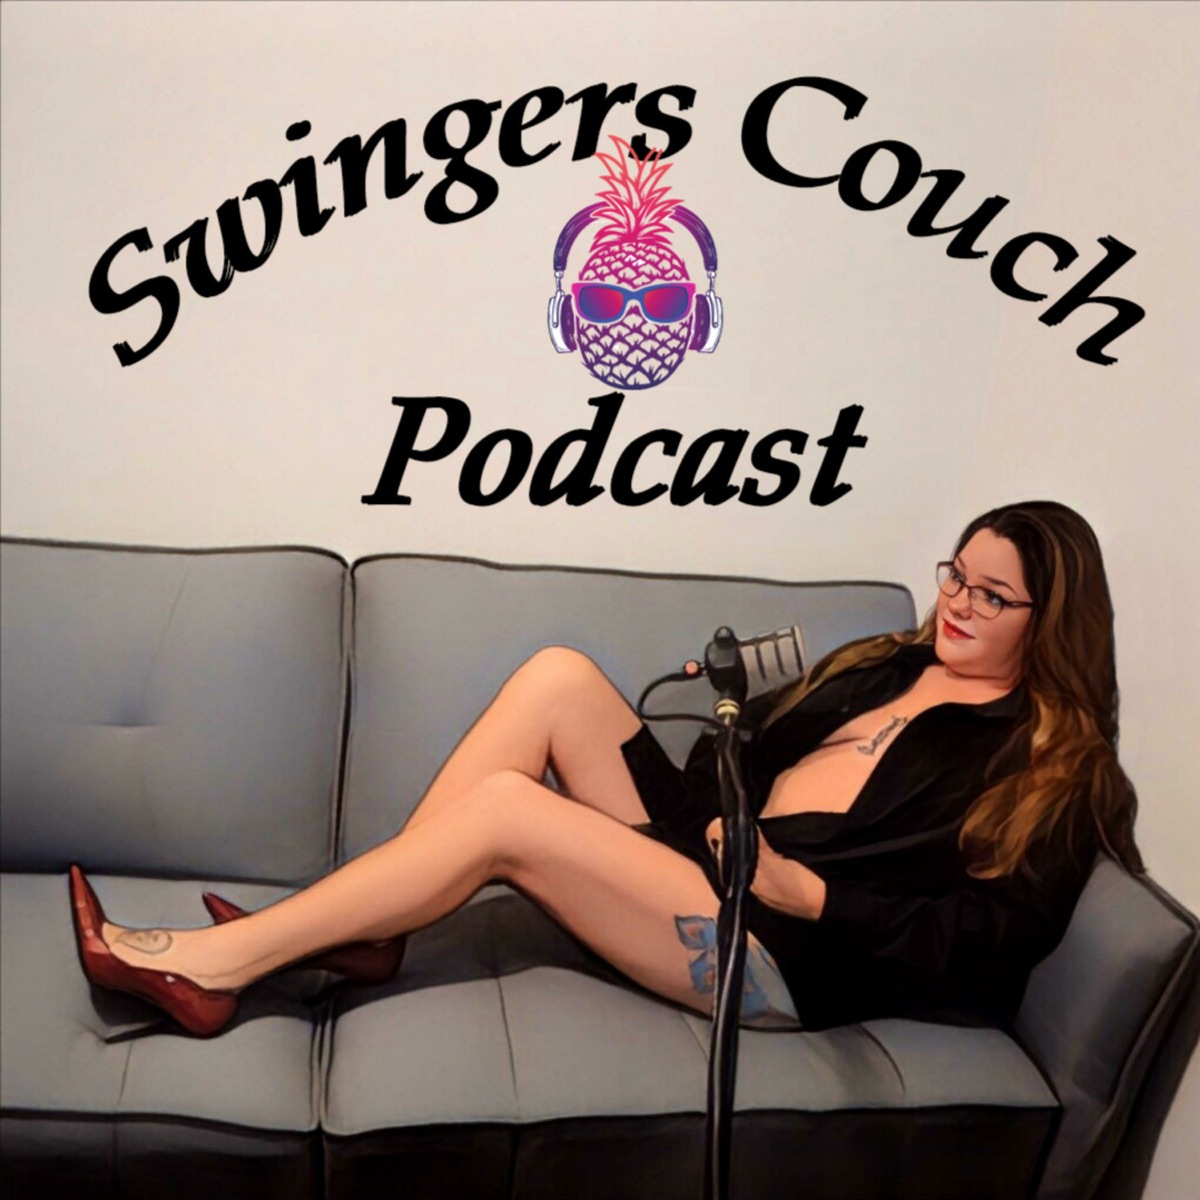 swingers couch podcast – Podcast image